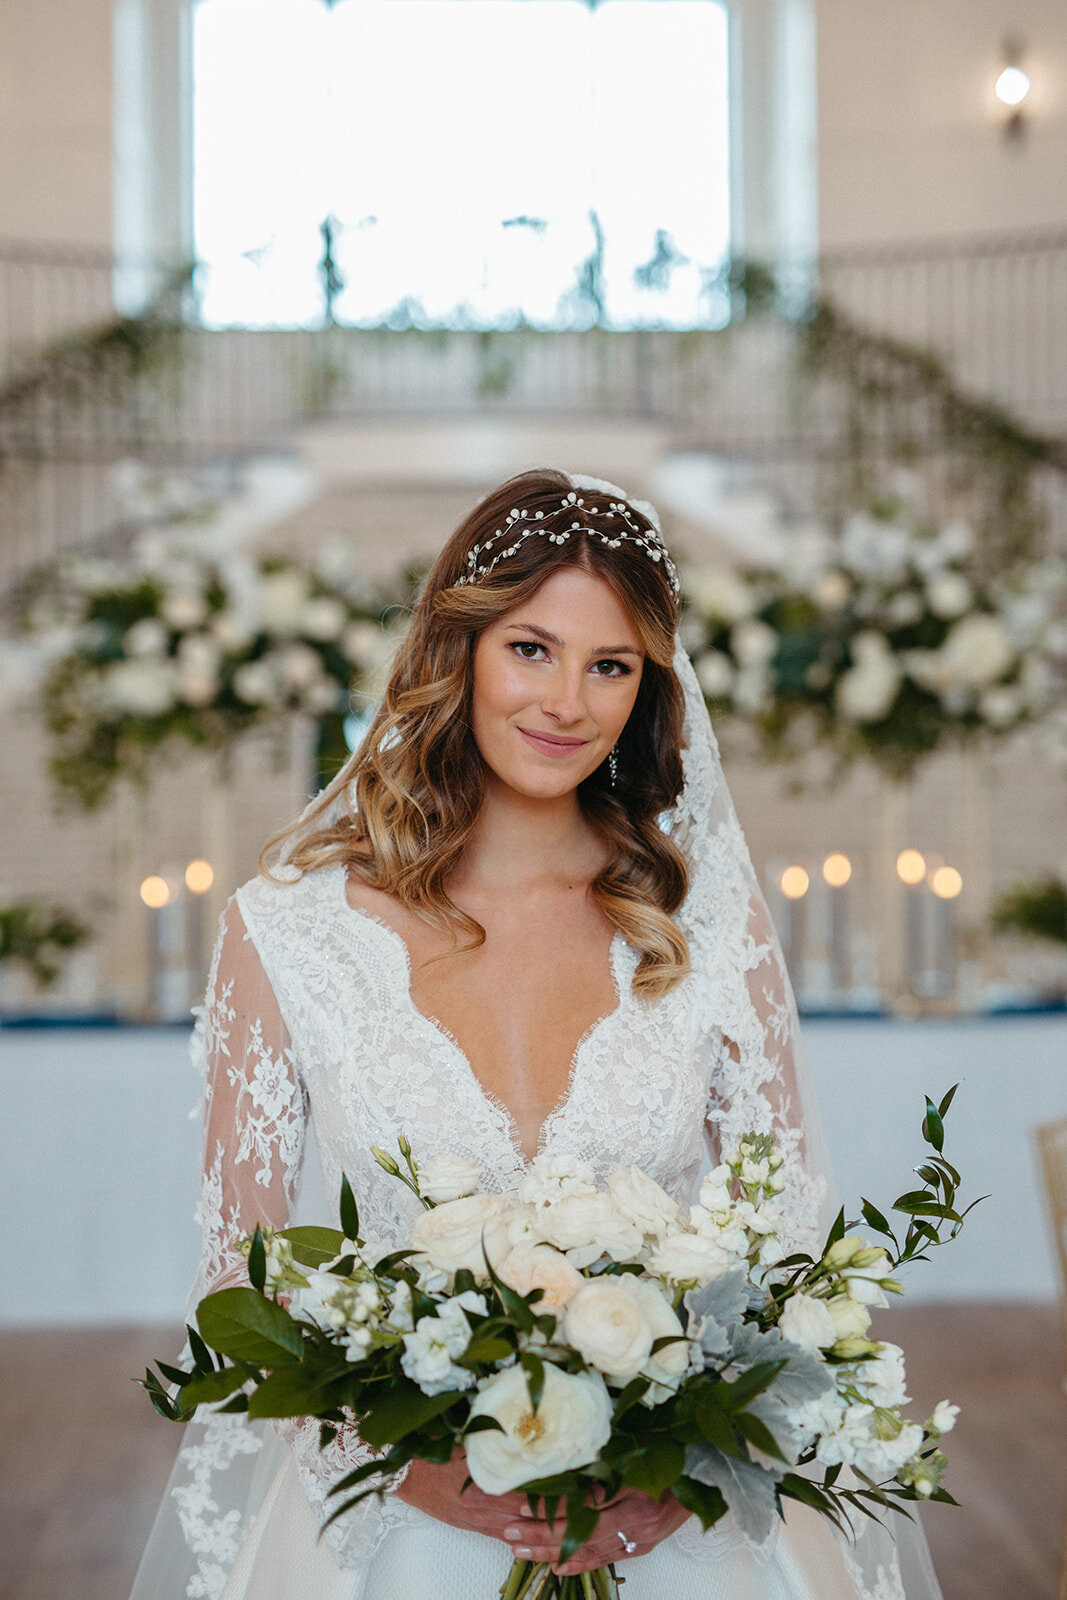 A bride in a white wedding gown holing a white bouquet of flowers in front of a table with lit candles and white florals.